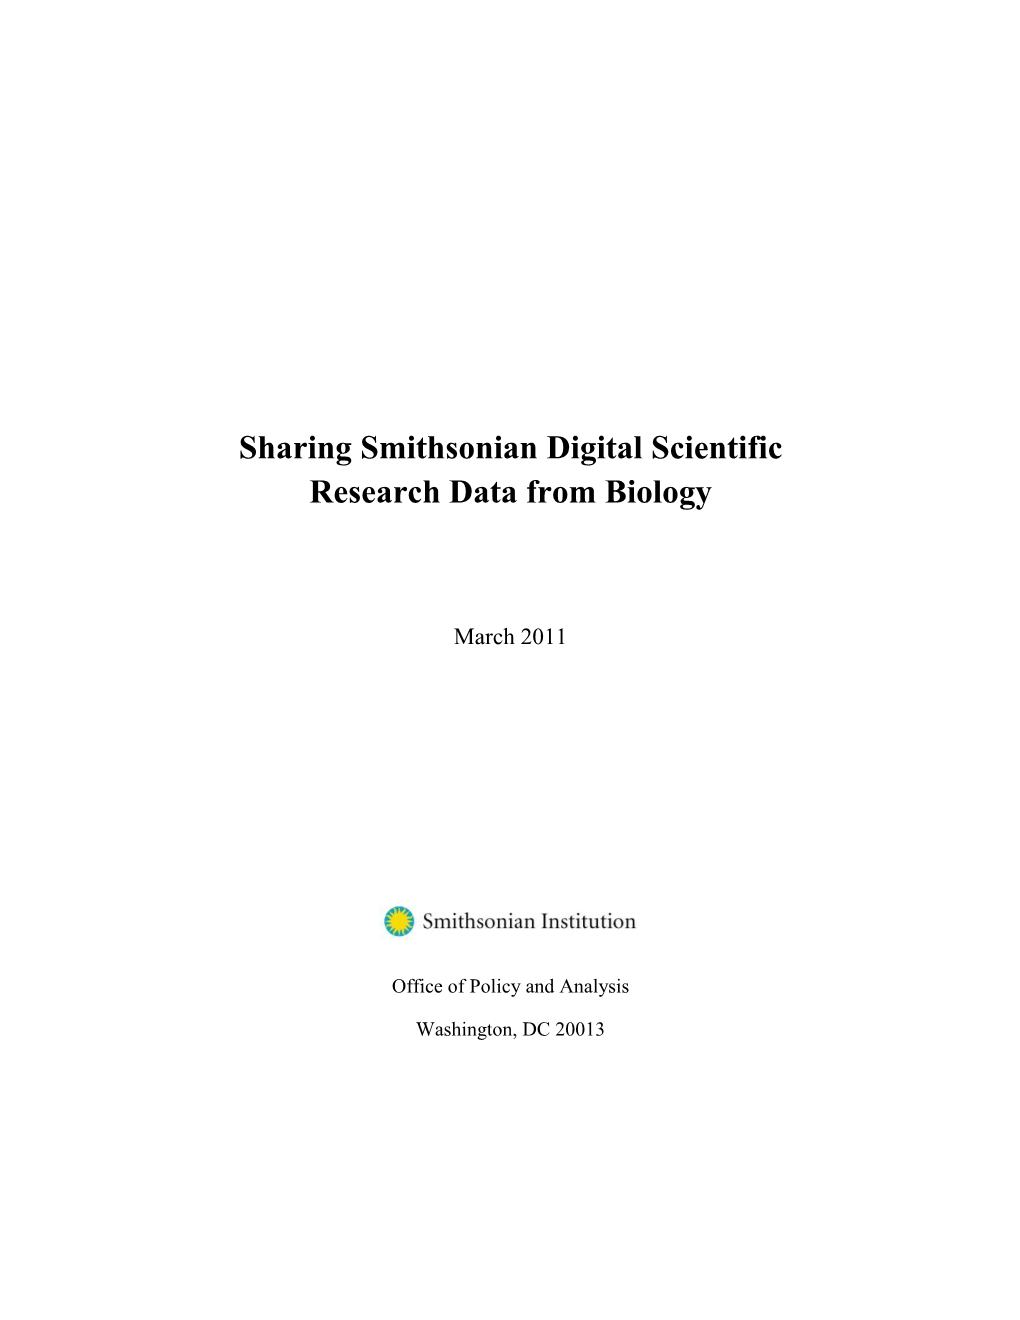 Sharing Smithsonian Digital Scientific Research Data from Biology